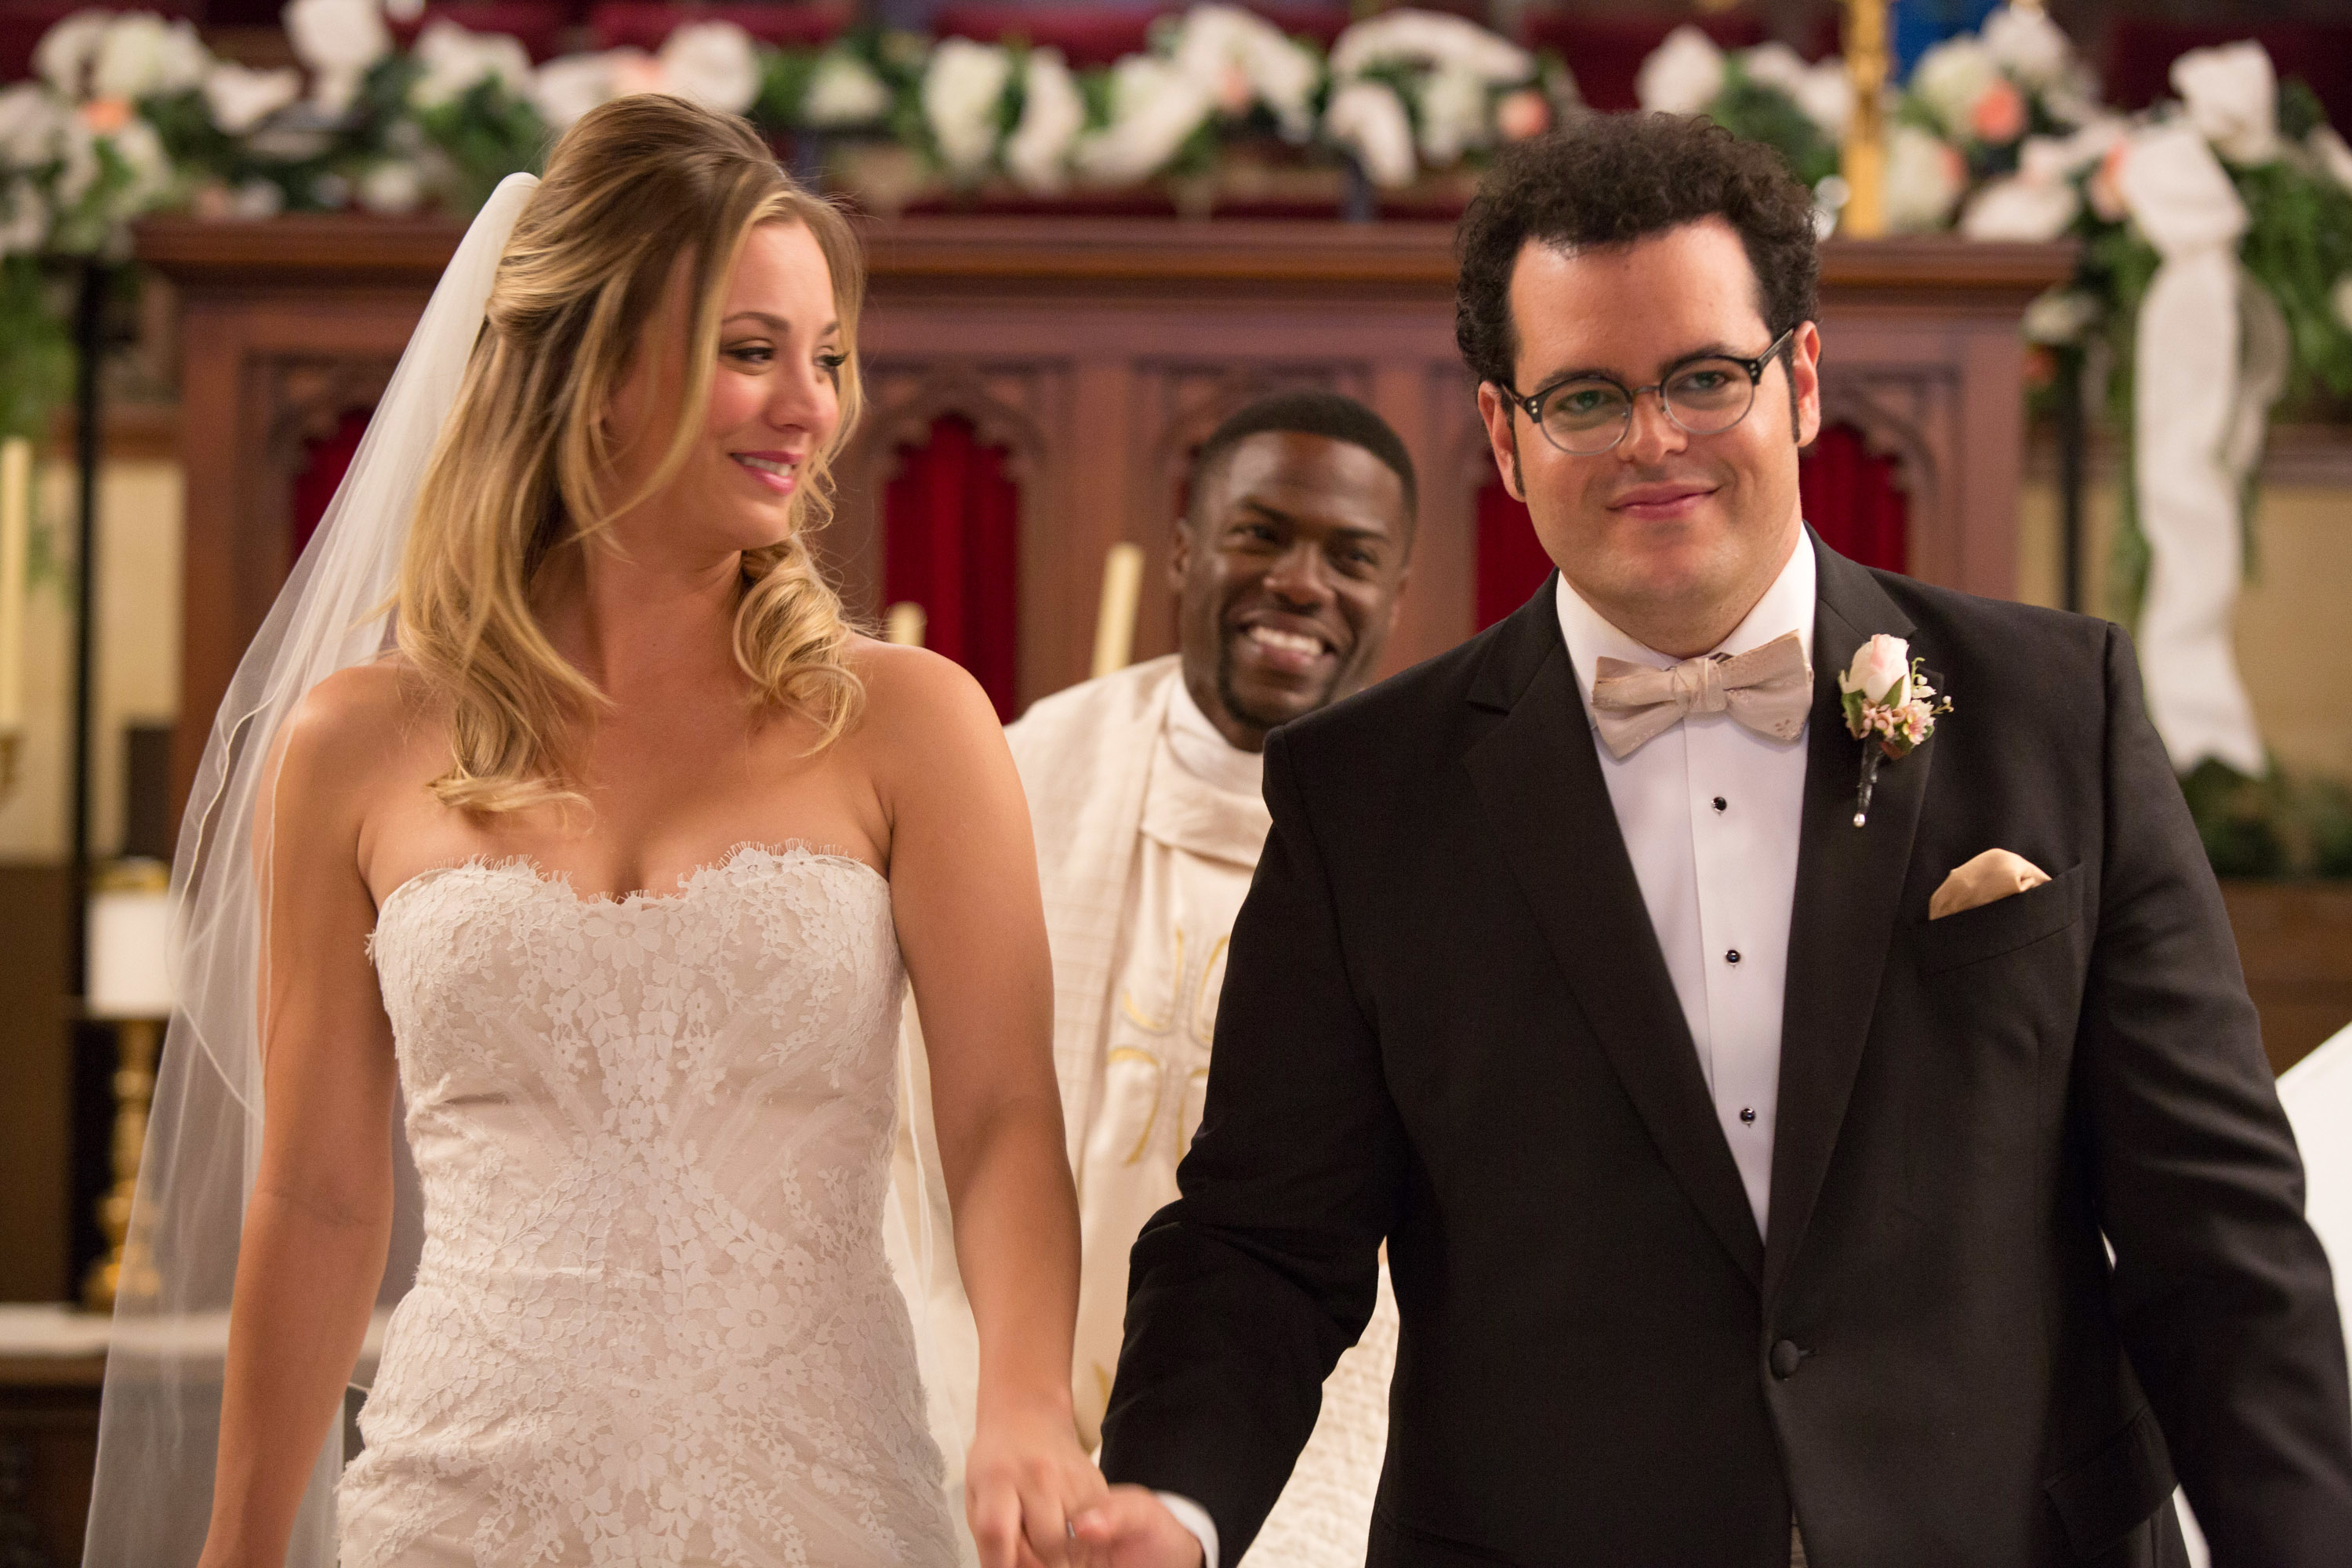 Kaley Cuoco, Kevin Hart and Josh Gad during a wedding scene in The Wedding Ringer